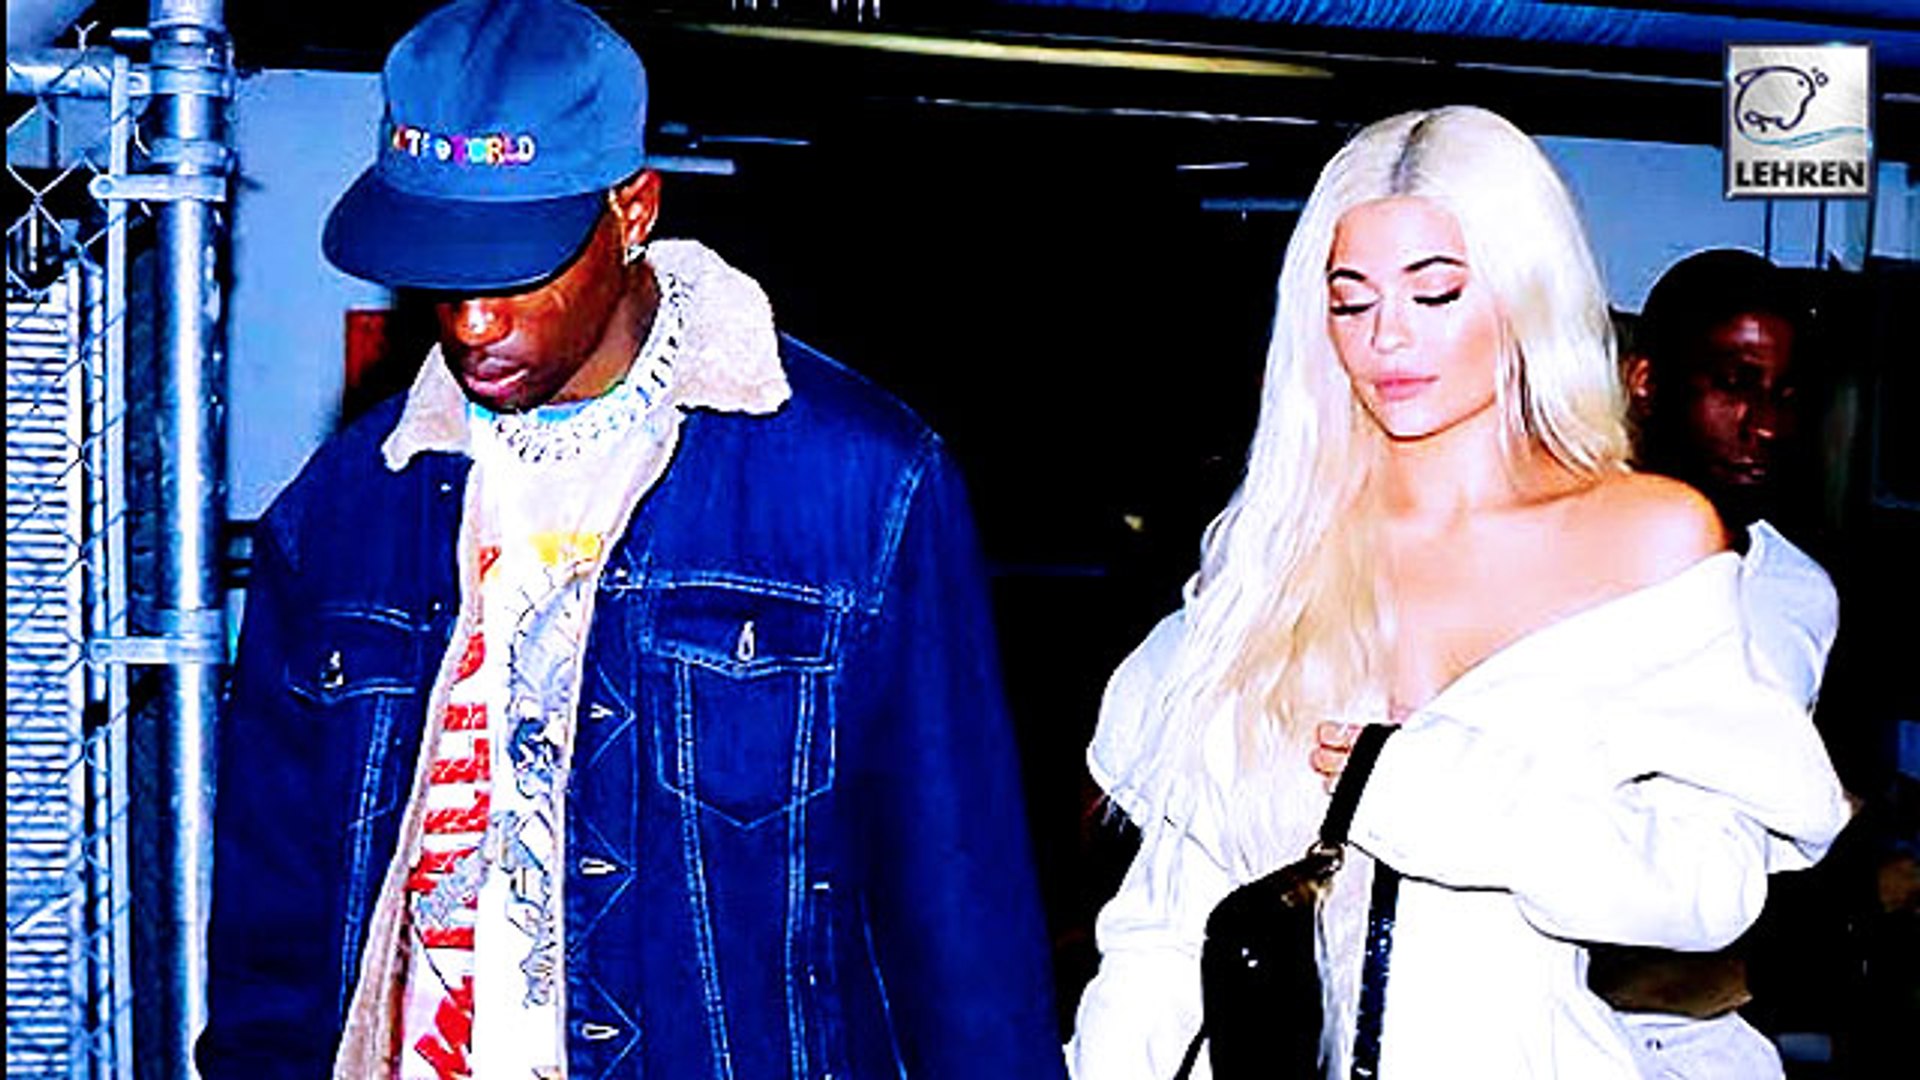 Travis Scott Hints At Problems With Kylie Jenner In Latest Song!